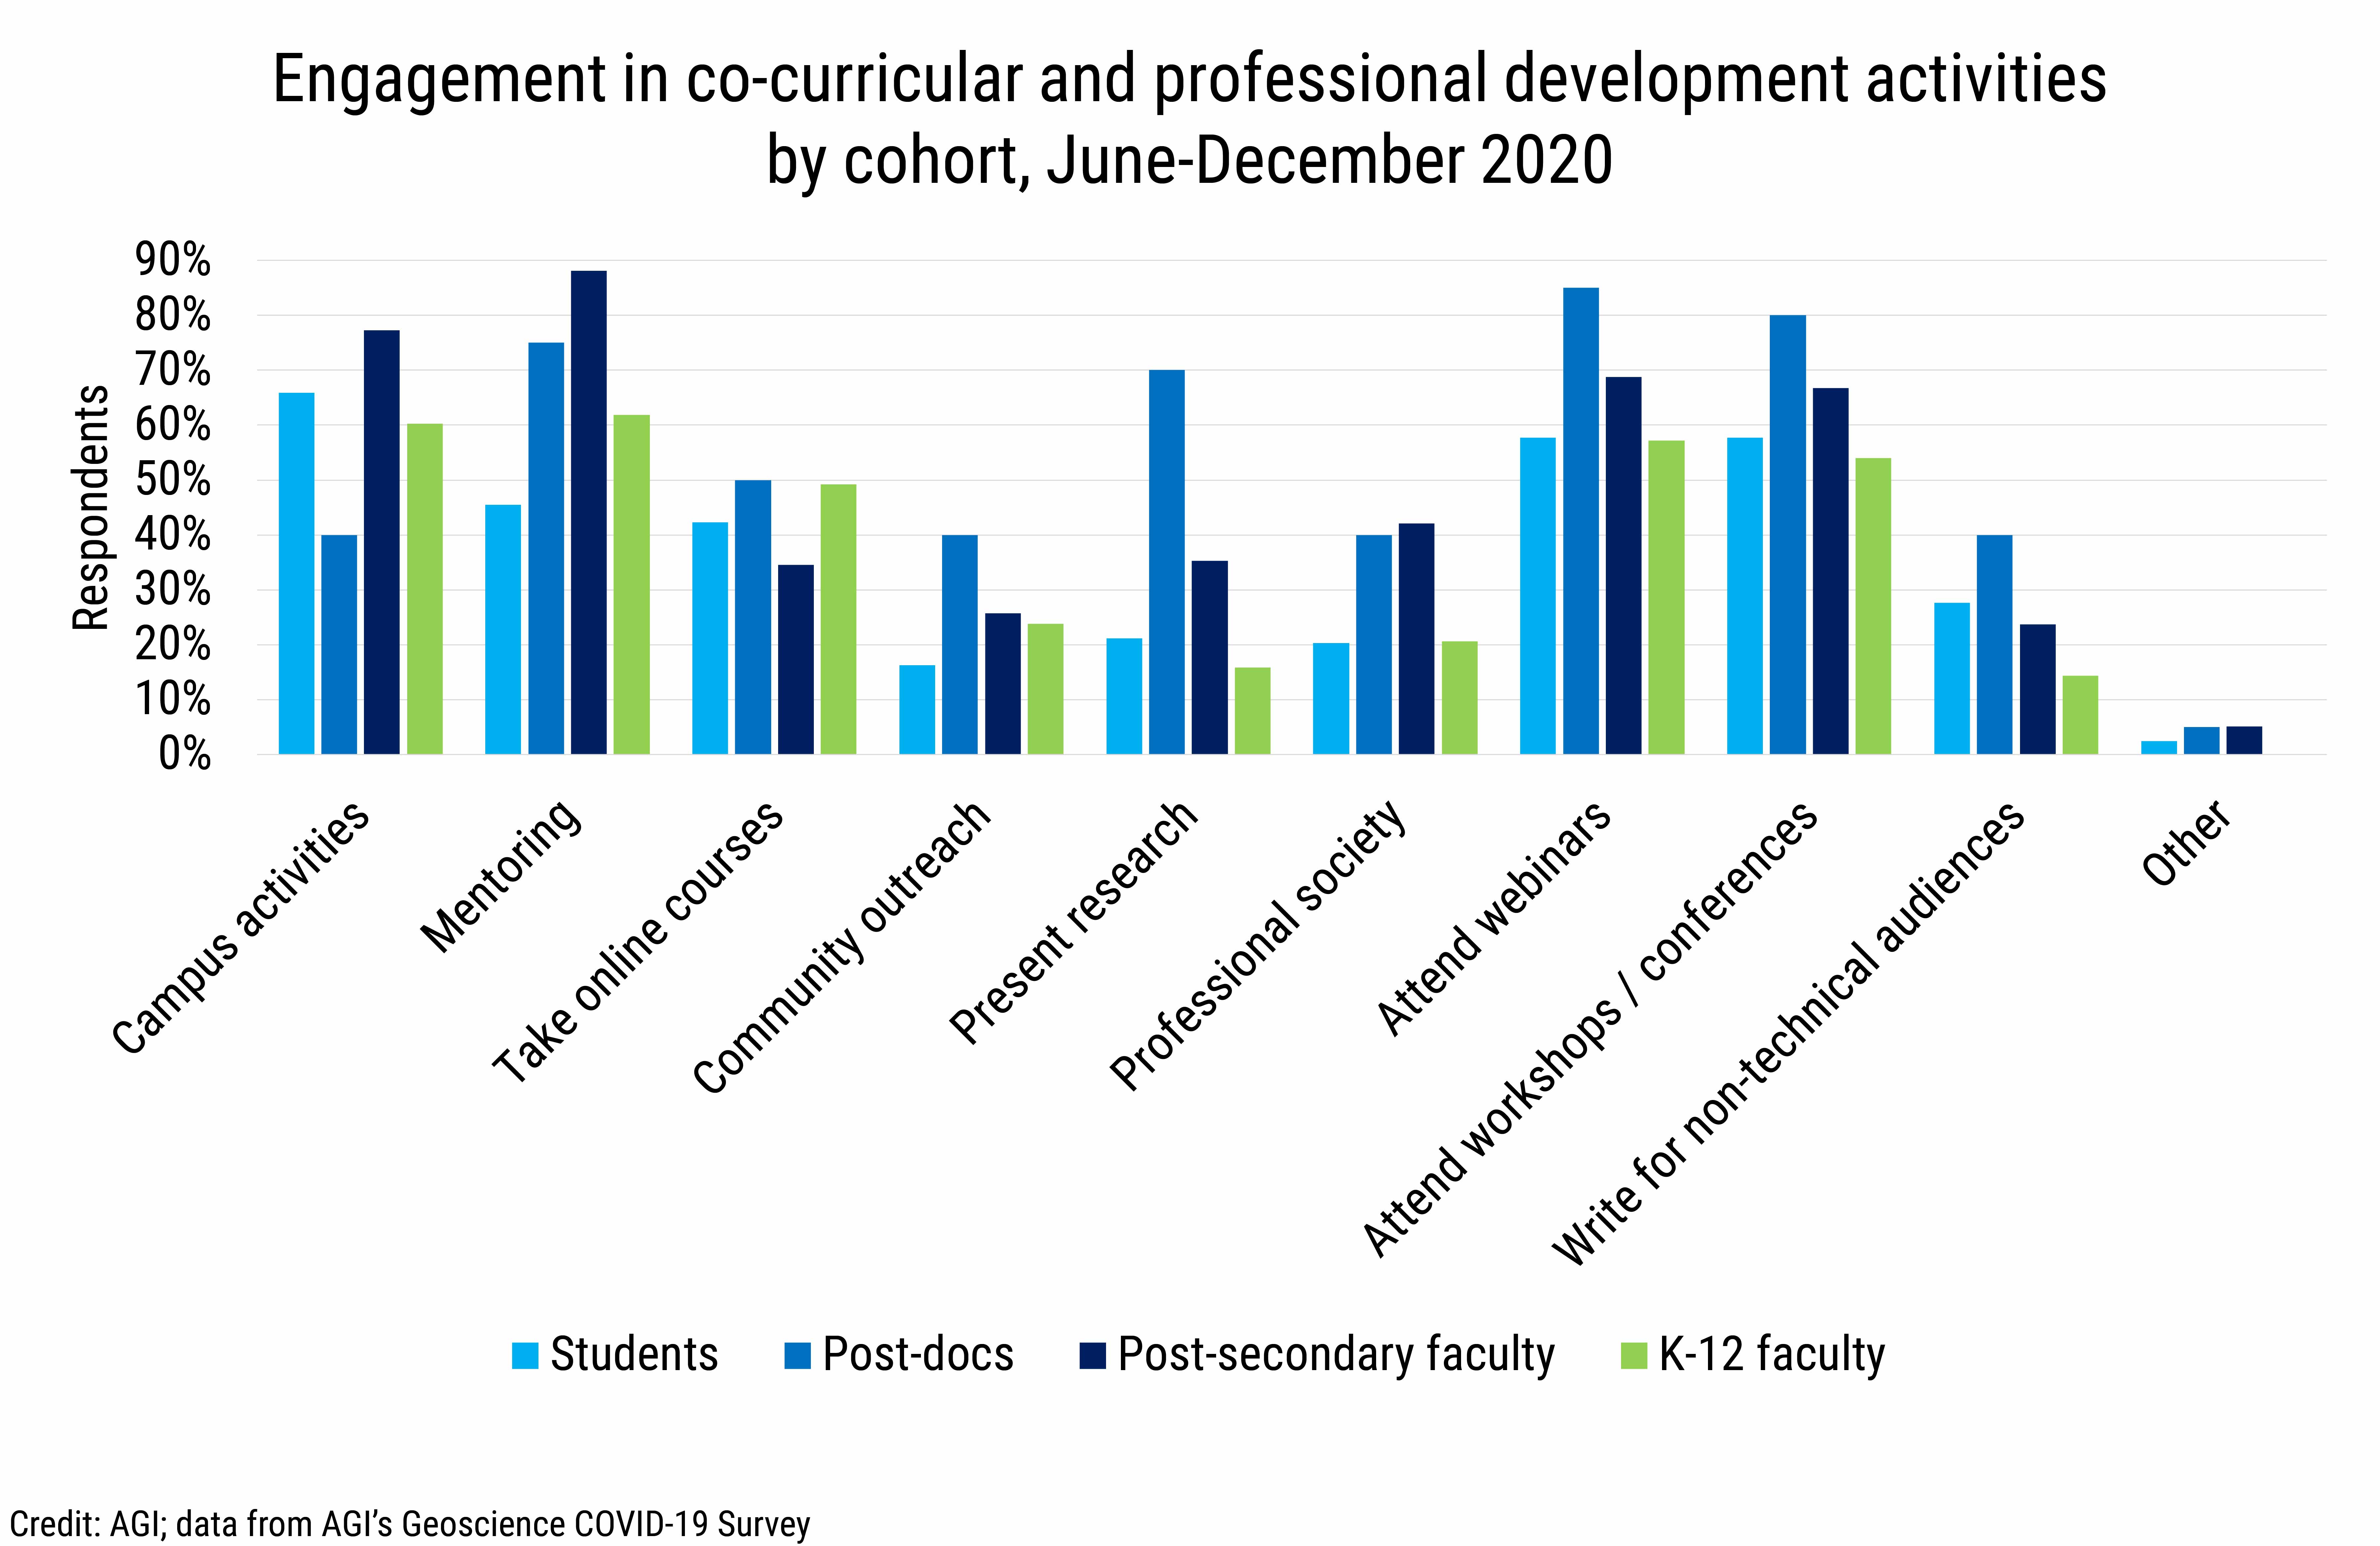 DB_2021-001 chart 01: Engagement in co-curricular and professional development activities by cohort, June-December 2020 (Credit: AGI; data from AGI's Geoscience COVID-19 Survey)